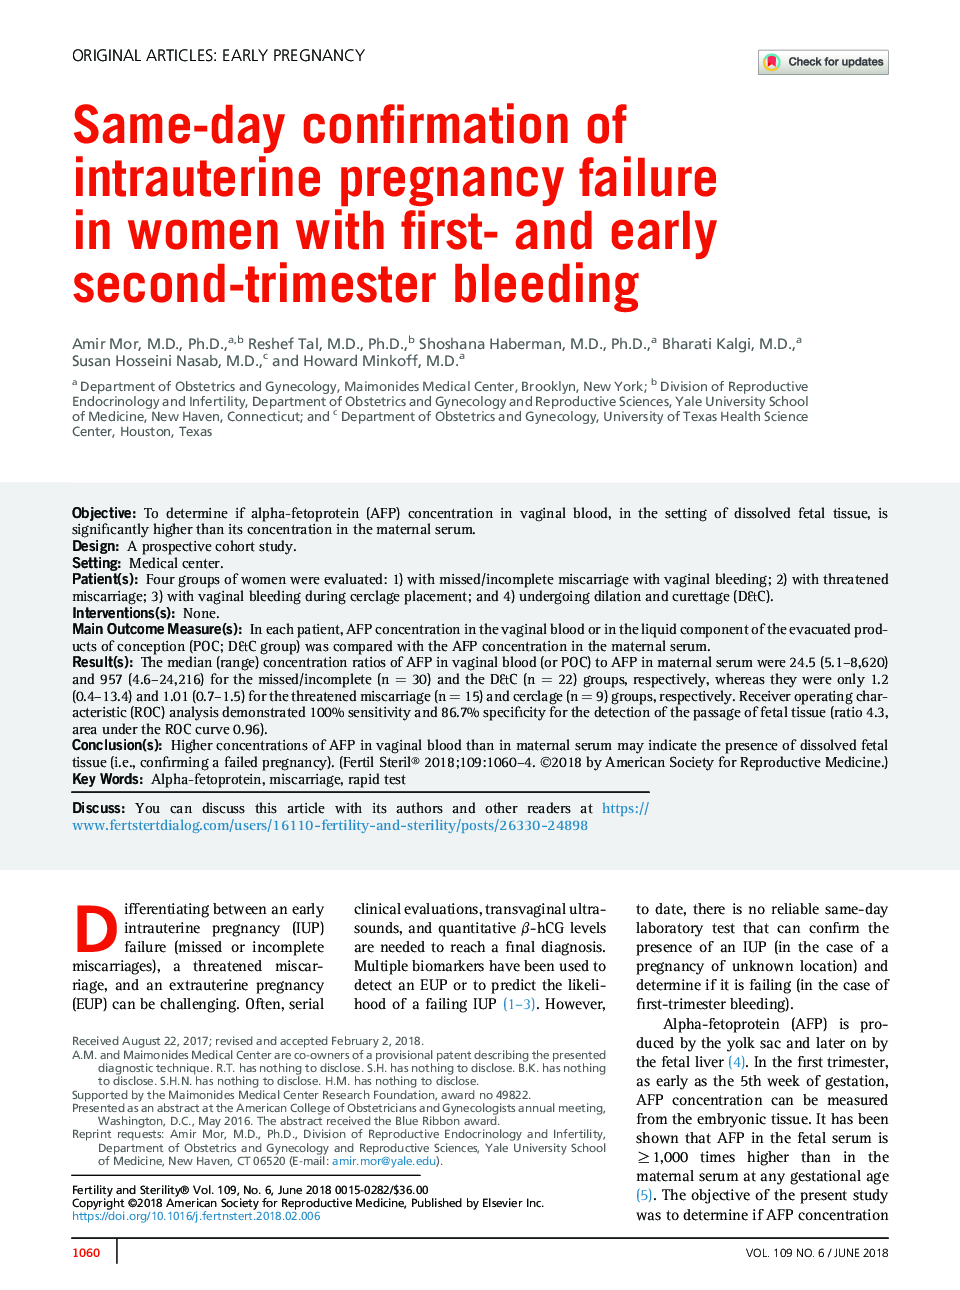 Same-day confirmation of intrauterine pregnancy failure in women with first- and early second-trimester bleeding